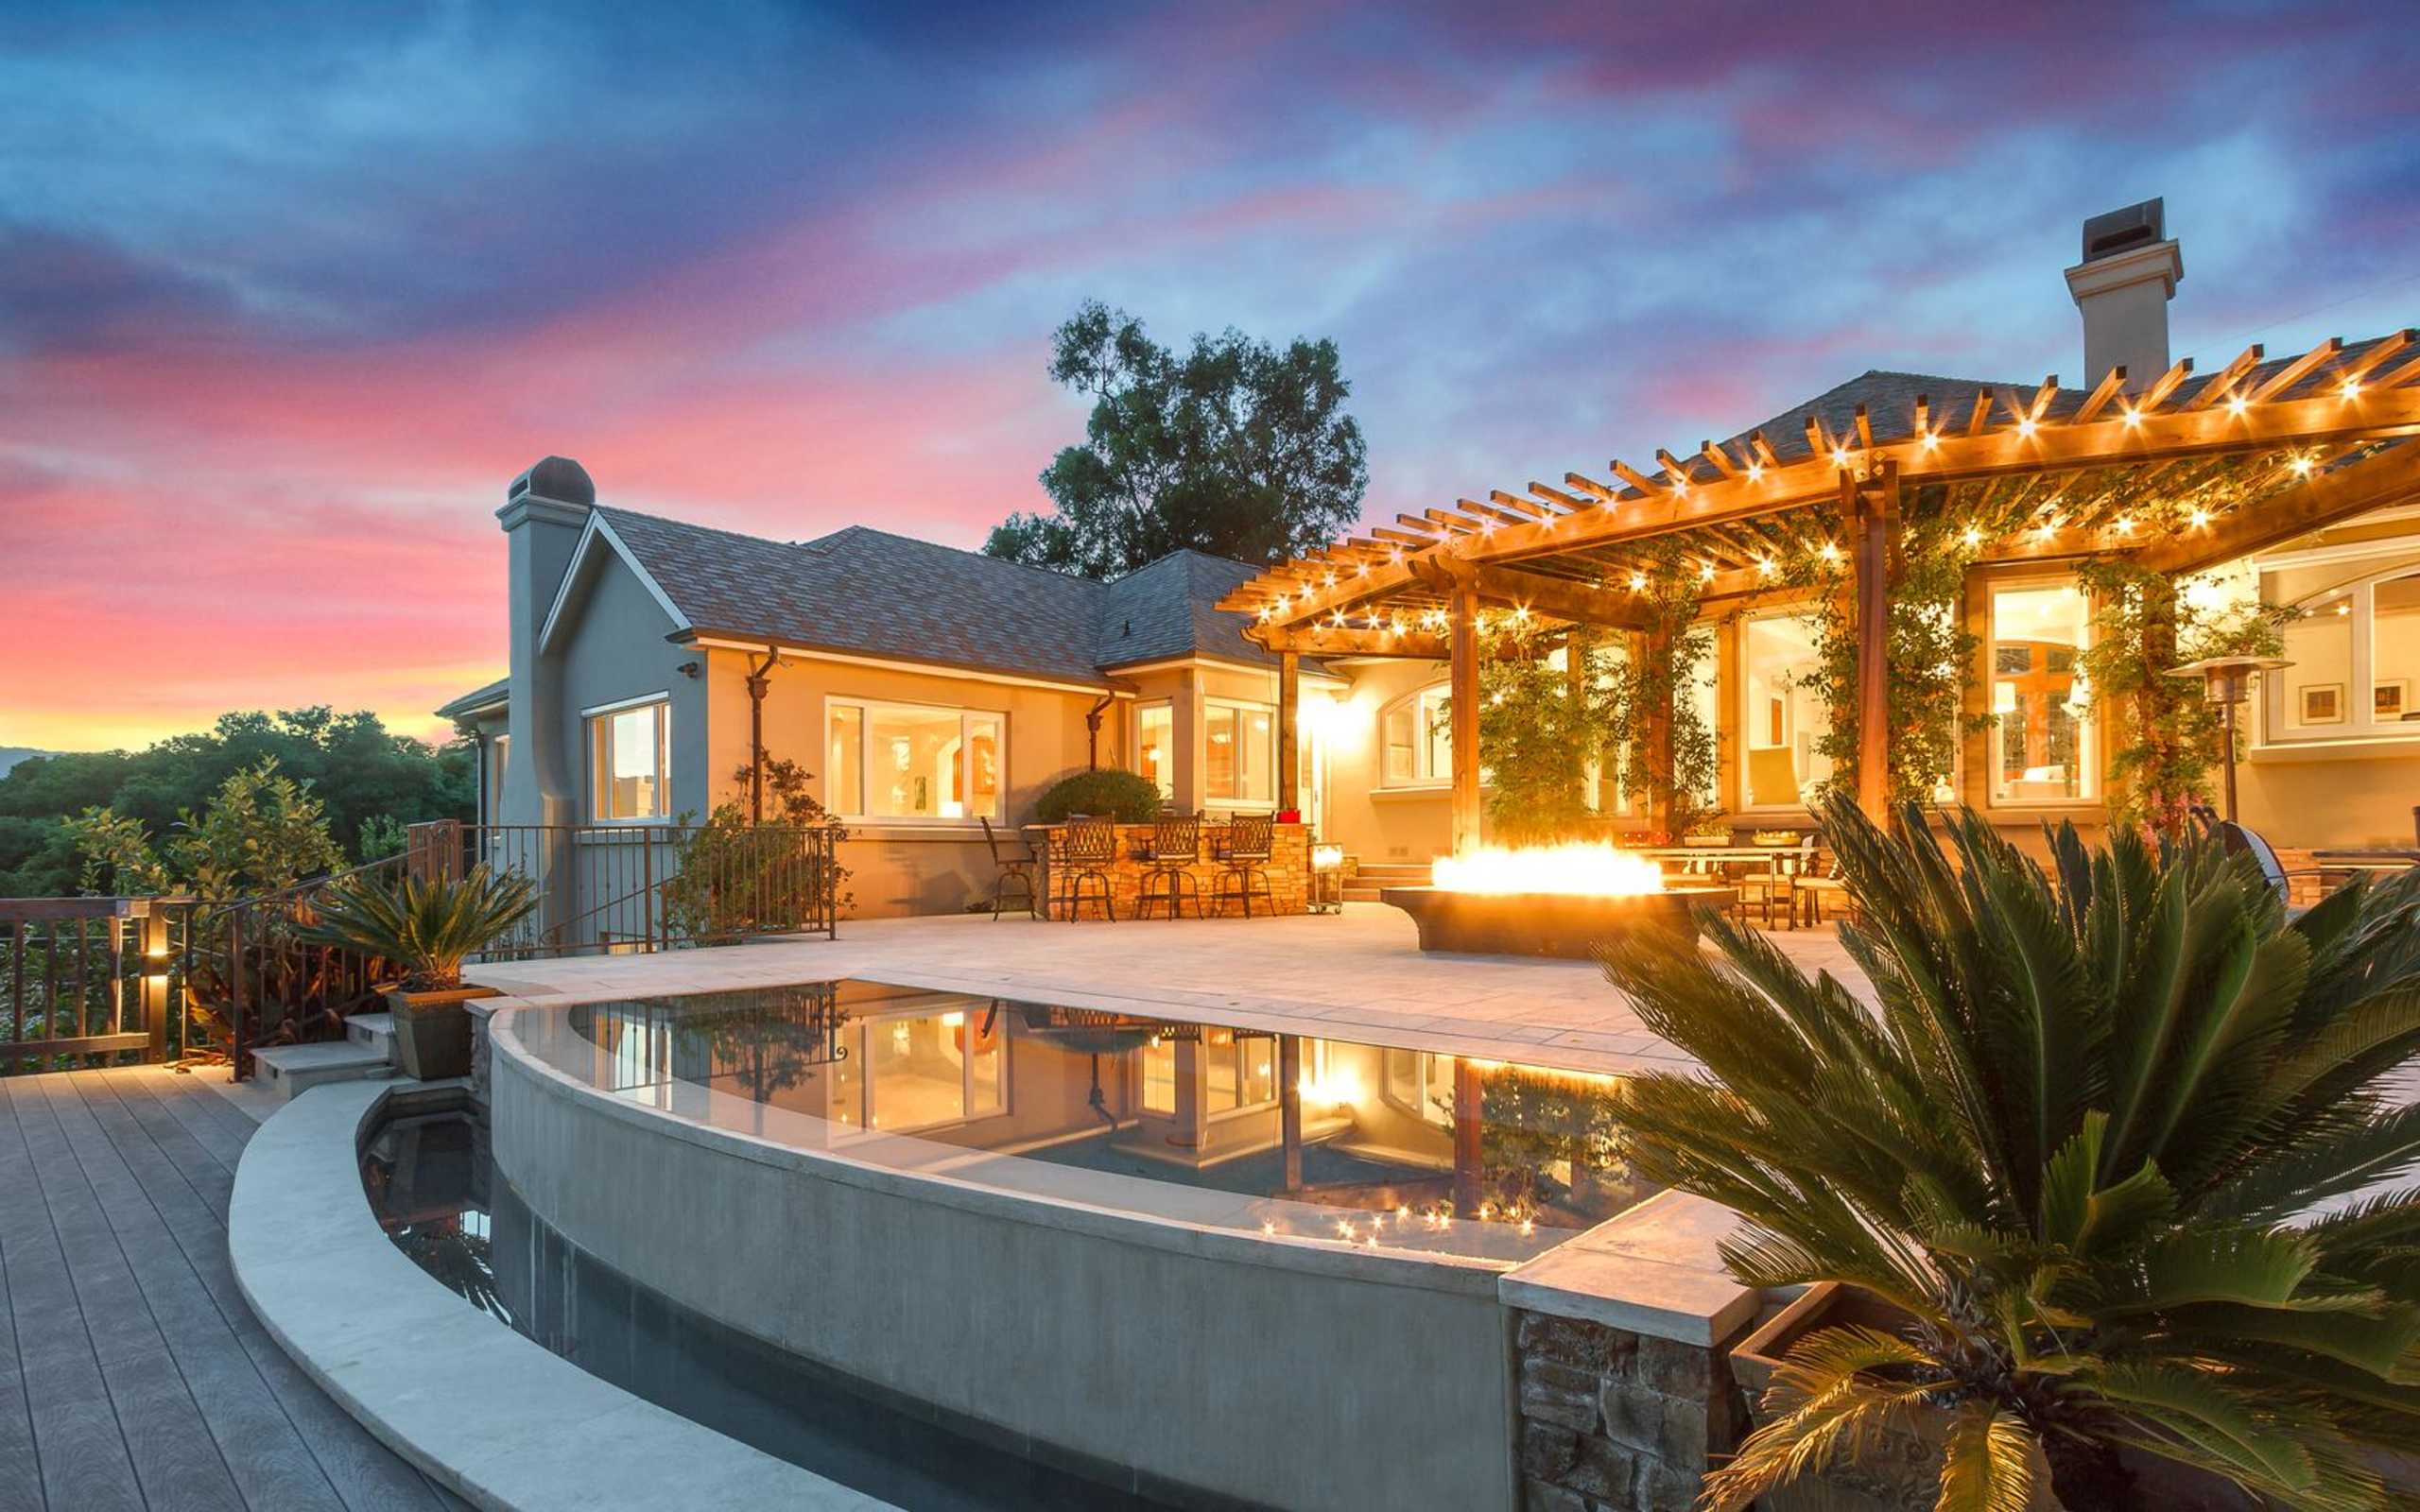 As an experienced Realtor of luxury properties, Jim utilizes the latest in video, 360-degree and drone technologies to showcase your home. This beautiful photo was included in the brochure of one of his luxury listings in Los Gatos Hills, CA.